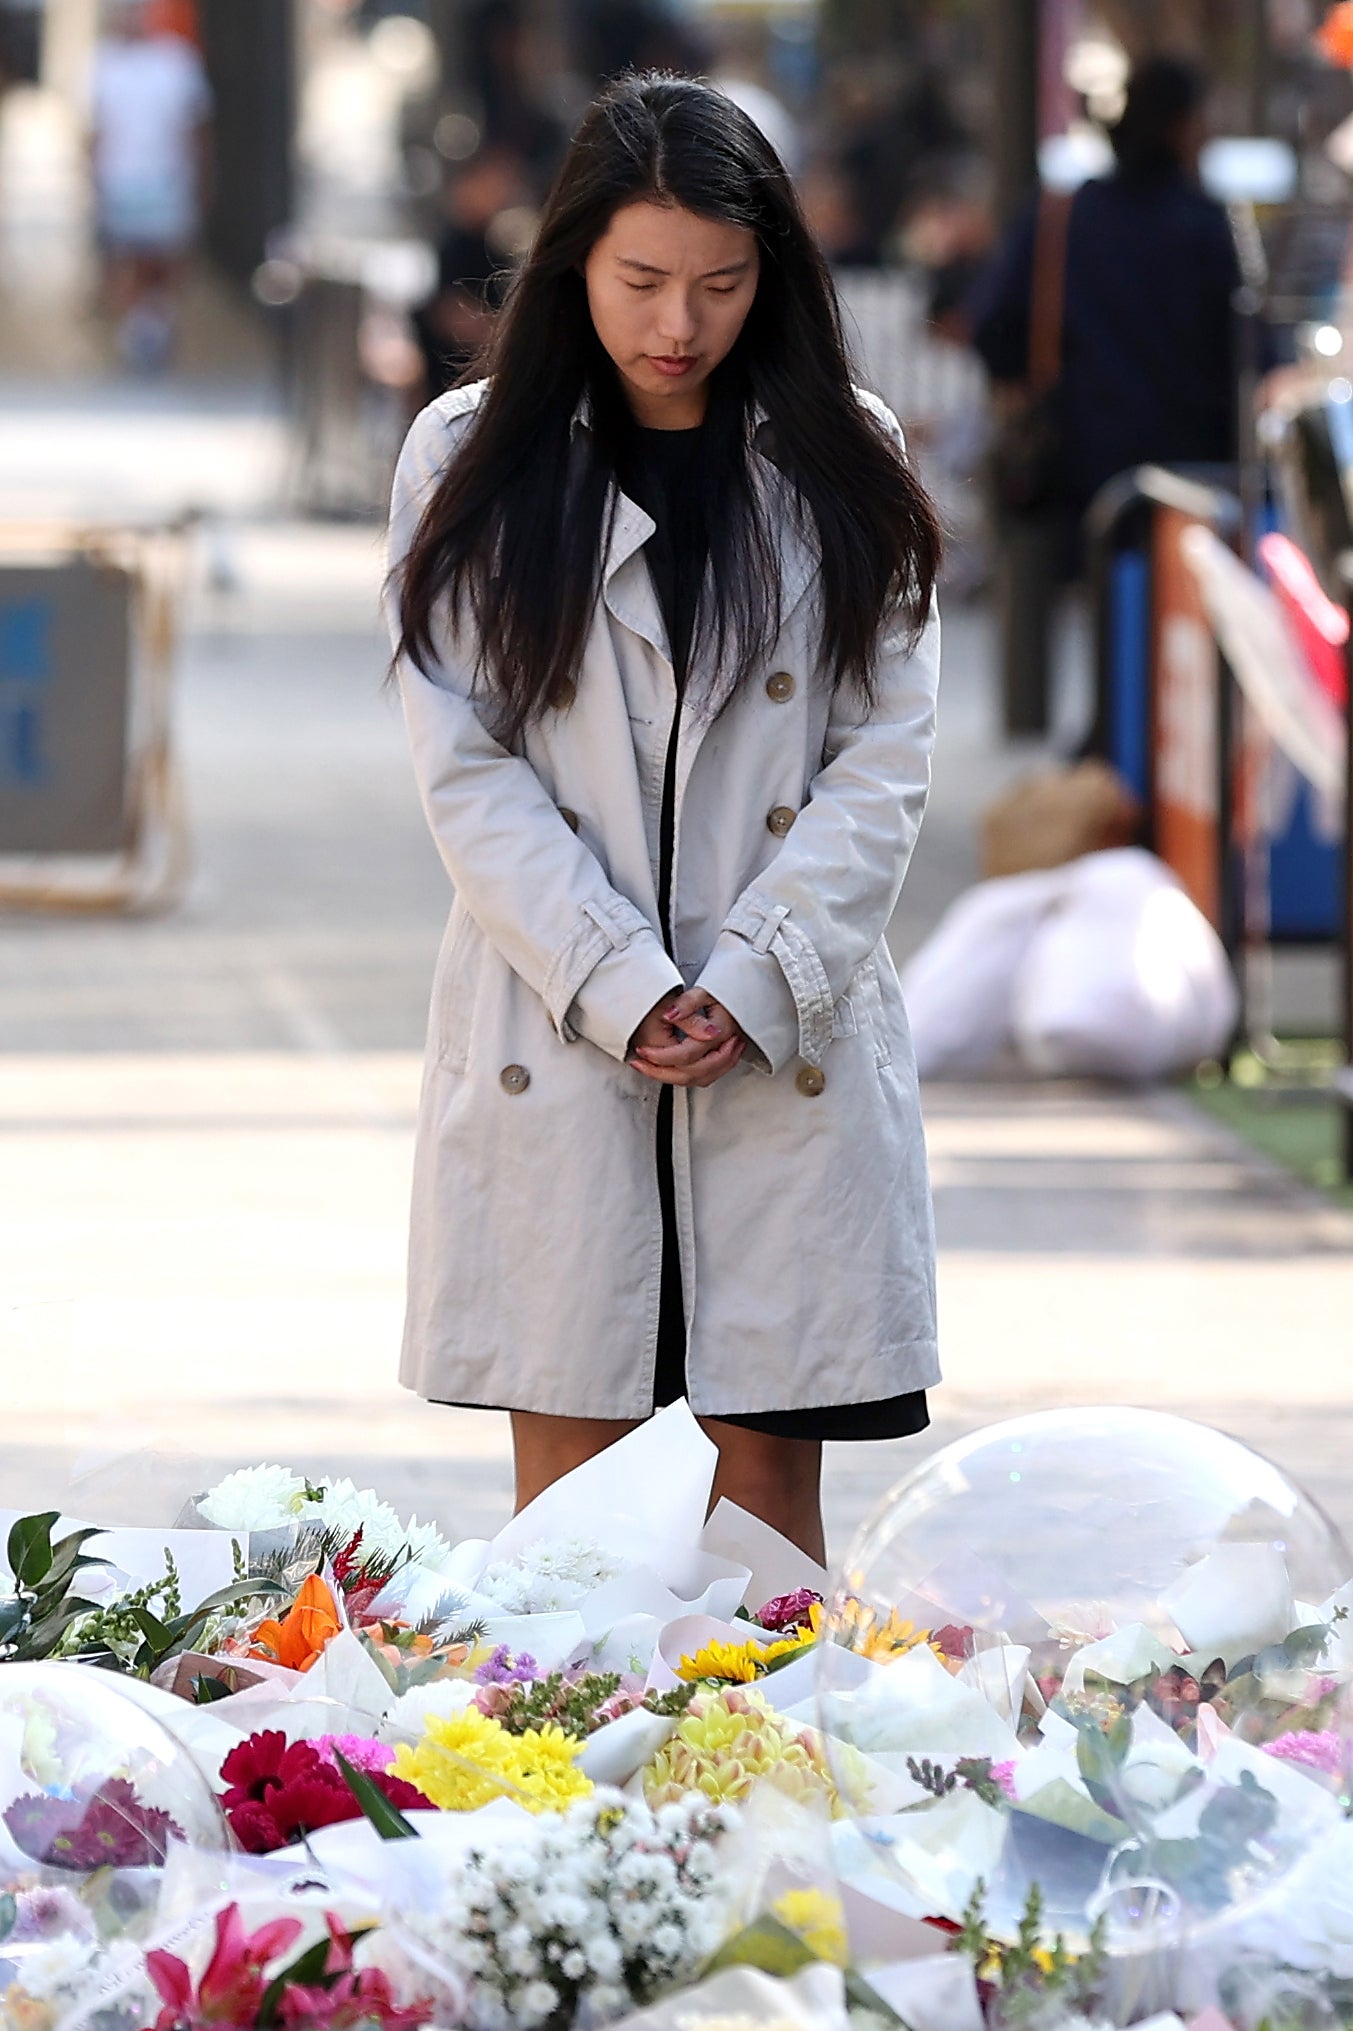 A woman takes a moment to remember those who died in the shopping centre attack